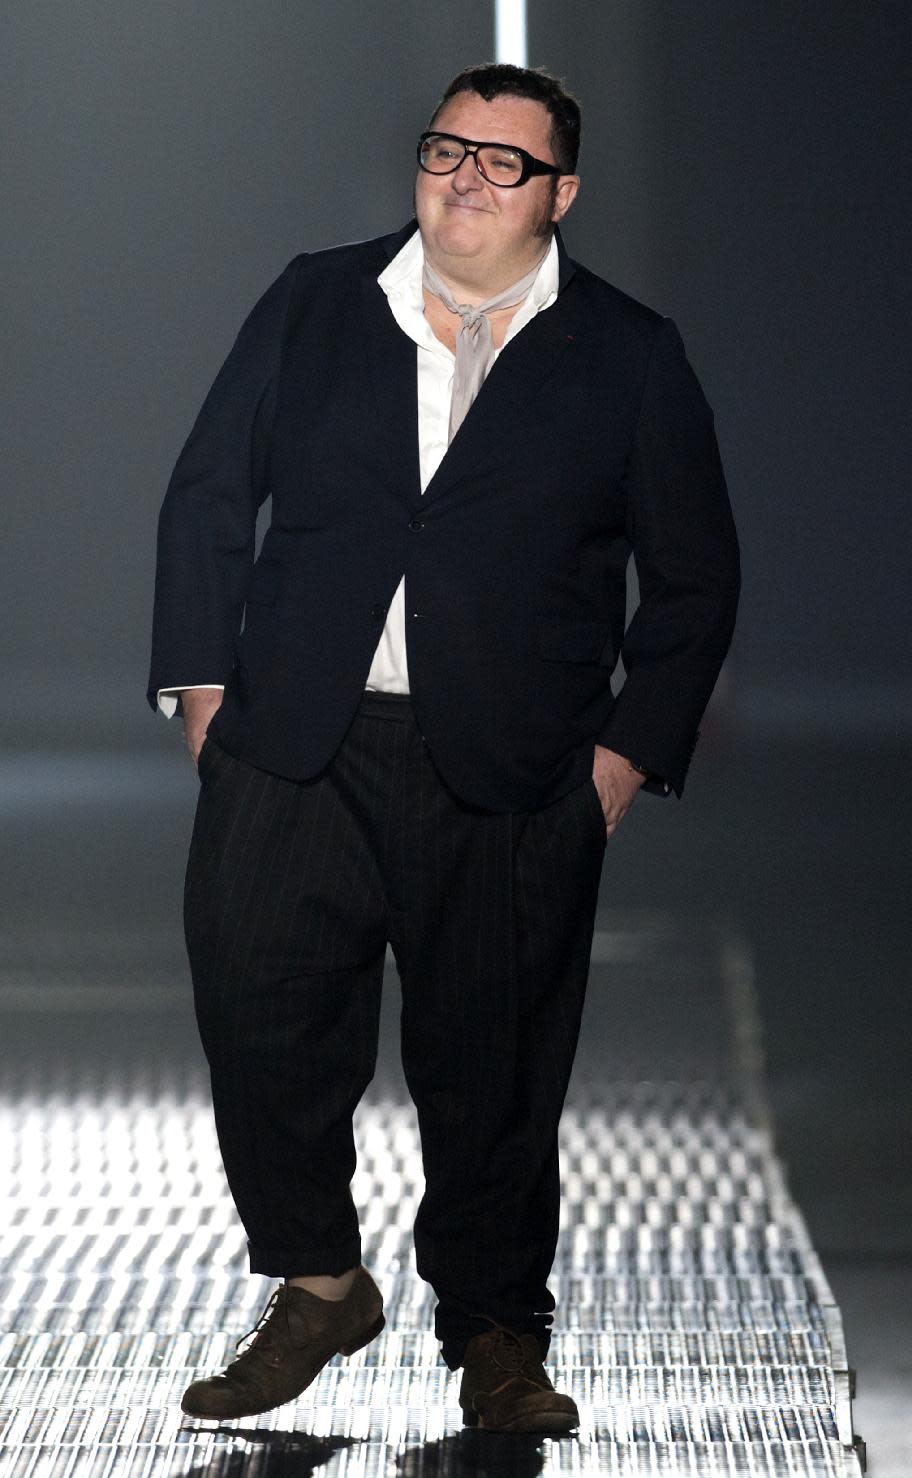 FILE - This July 1, 2012 file photo shows Israeli fashion designer Alber Elbaz at the end of the show for his Men's Spring-Summer 2013 collection, for Lanvin fashion house in Paris, France. Makeup powerhouse Lancome announced Monday, Jan. 14, 2013 that Elbaz will have a line of cosmetics, Lancome x Alber Elbaz, launching in June. (AP Photo/Jacques Brinon, file)